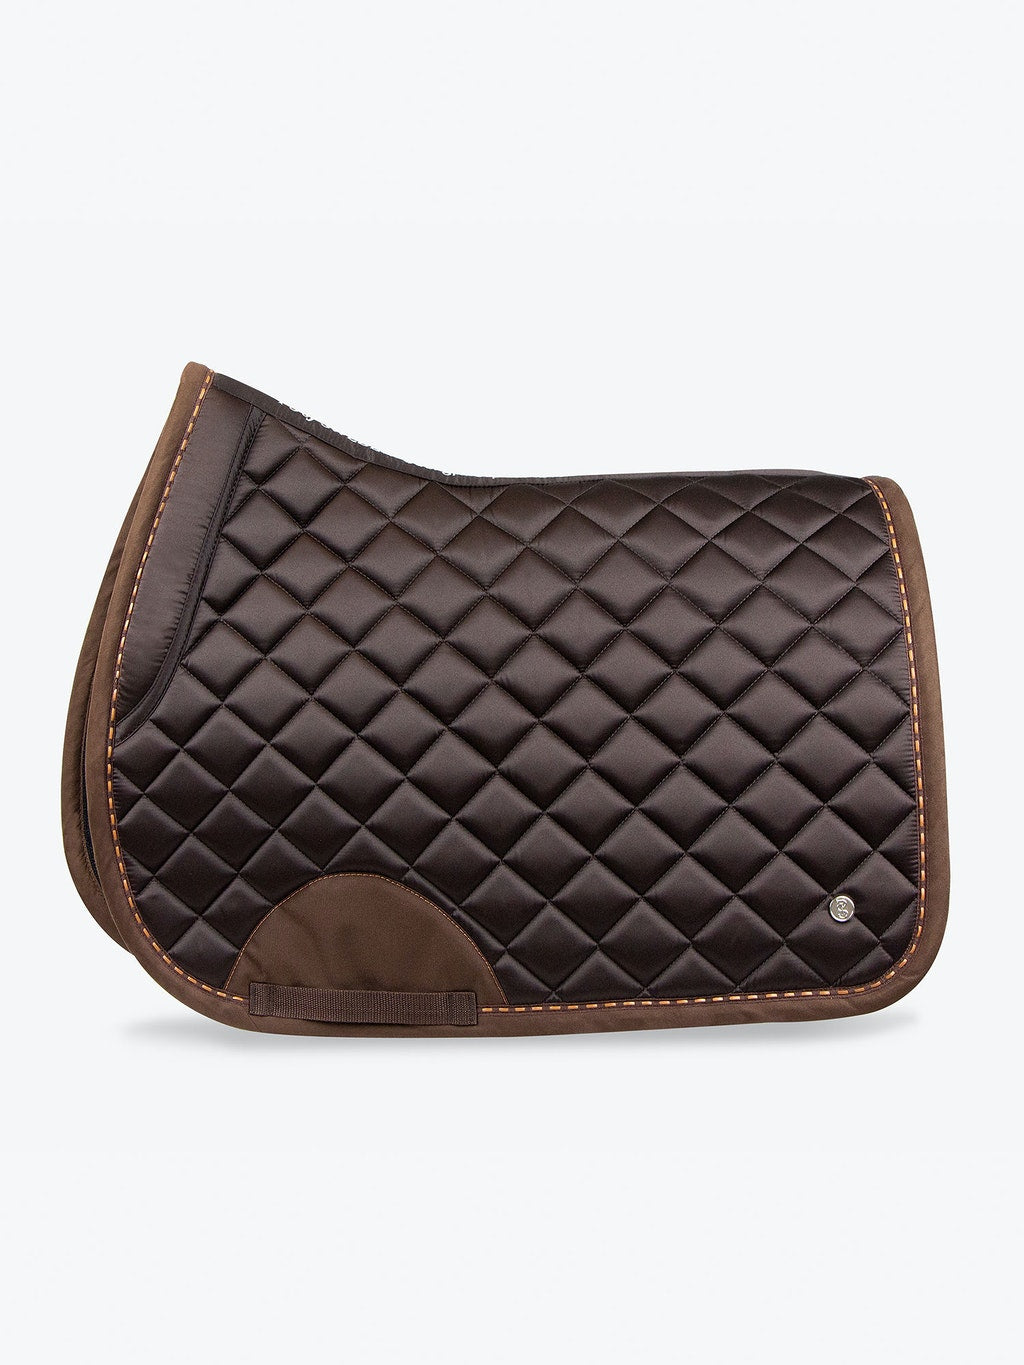 PS of Sweden FW21 Brown Suede Coffee Saddle Pad | Dressage or Jump